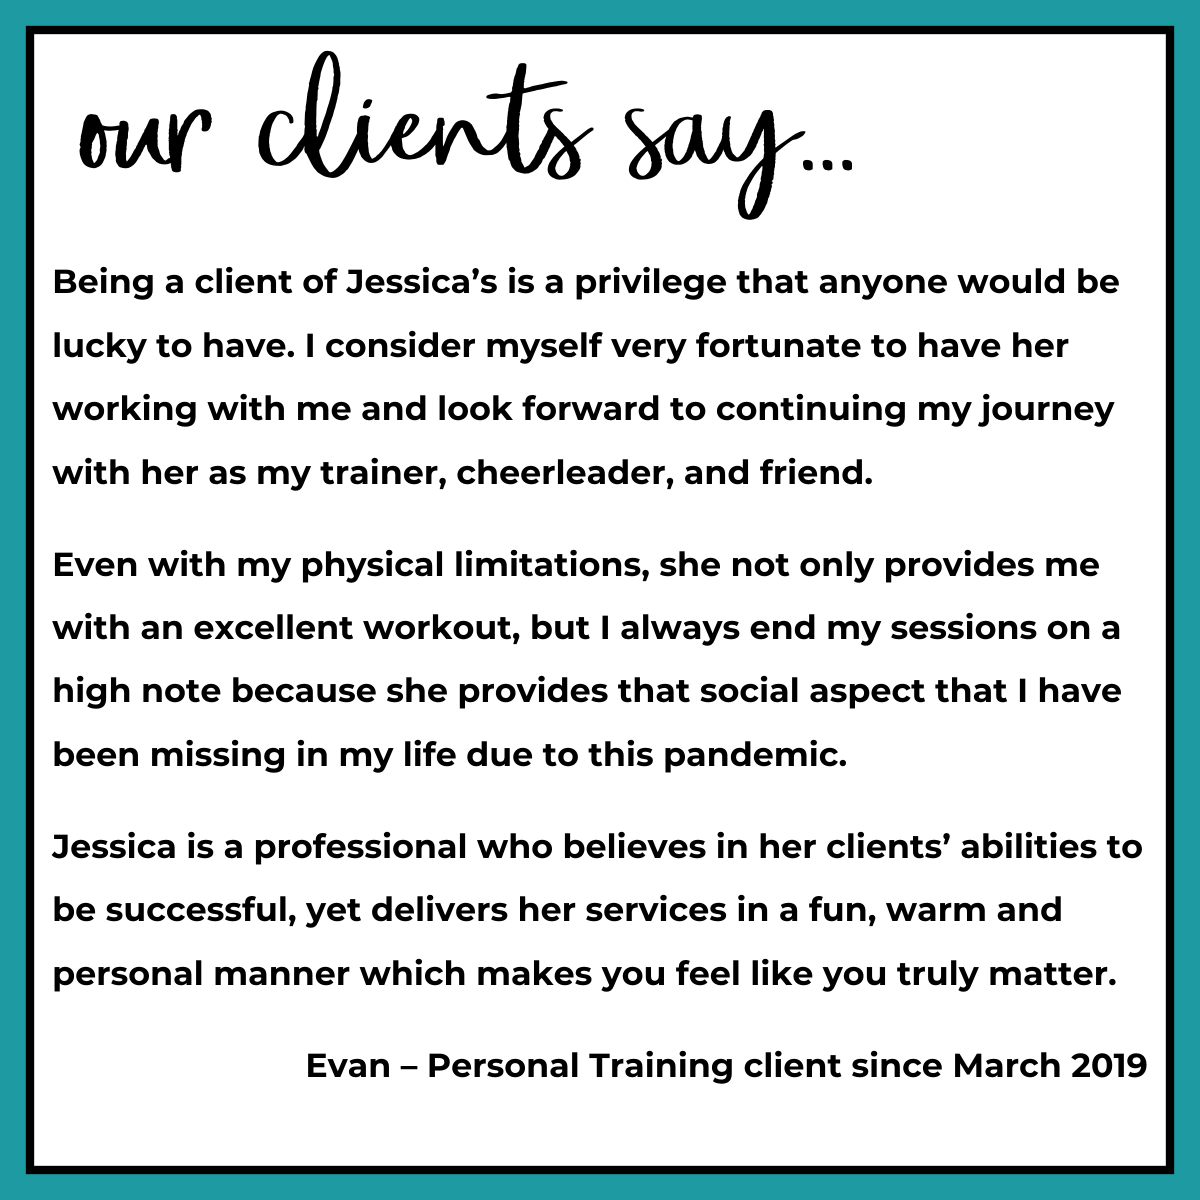 Testimonial about Jessica from client Evan